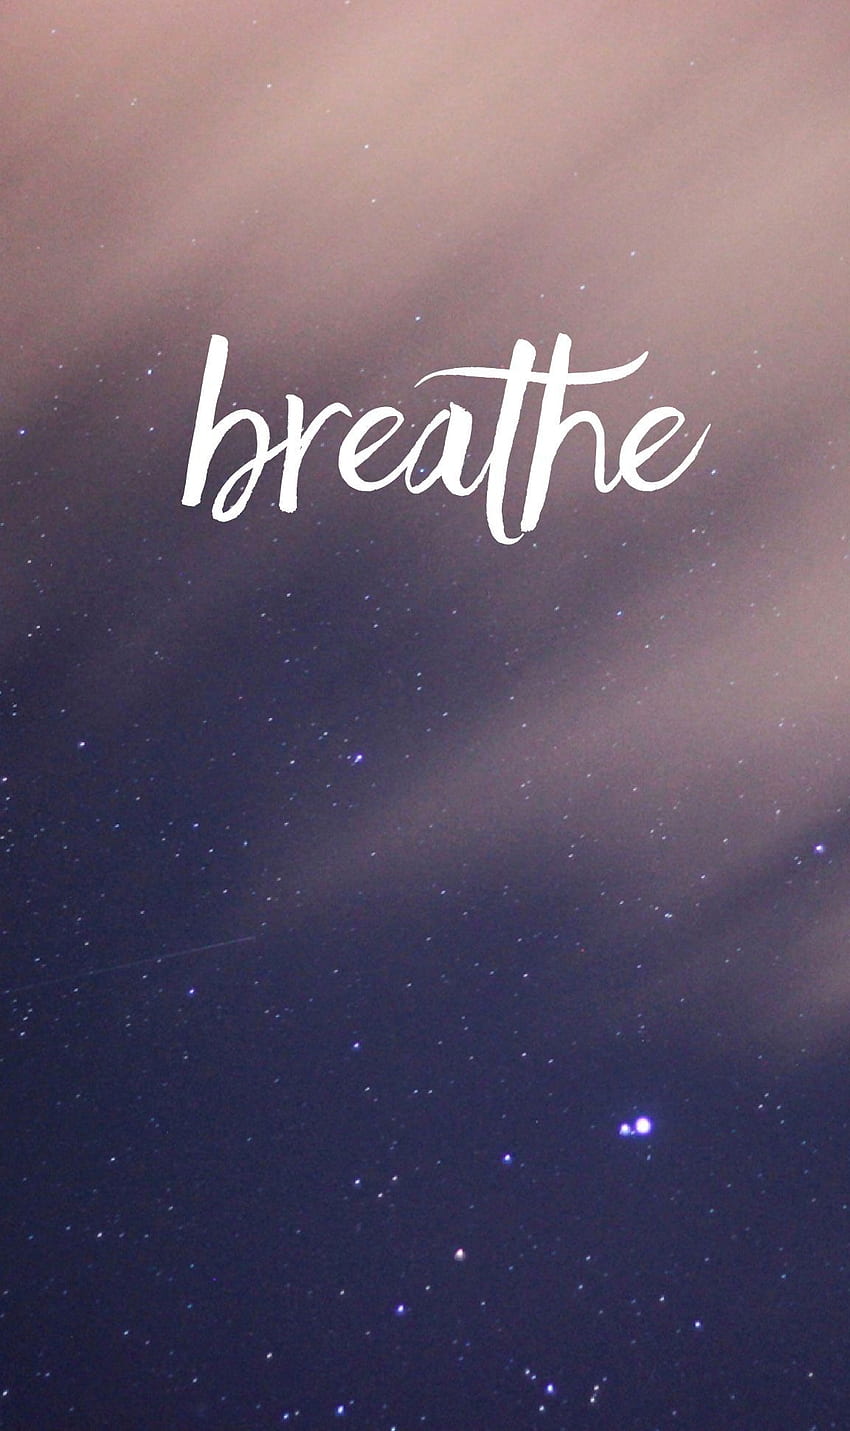 Just Breathe  Wallpaper by Thespeed179 on DeviantArt